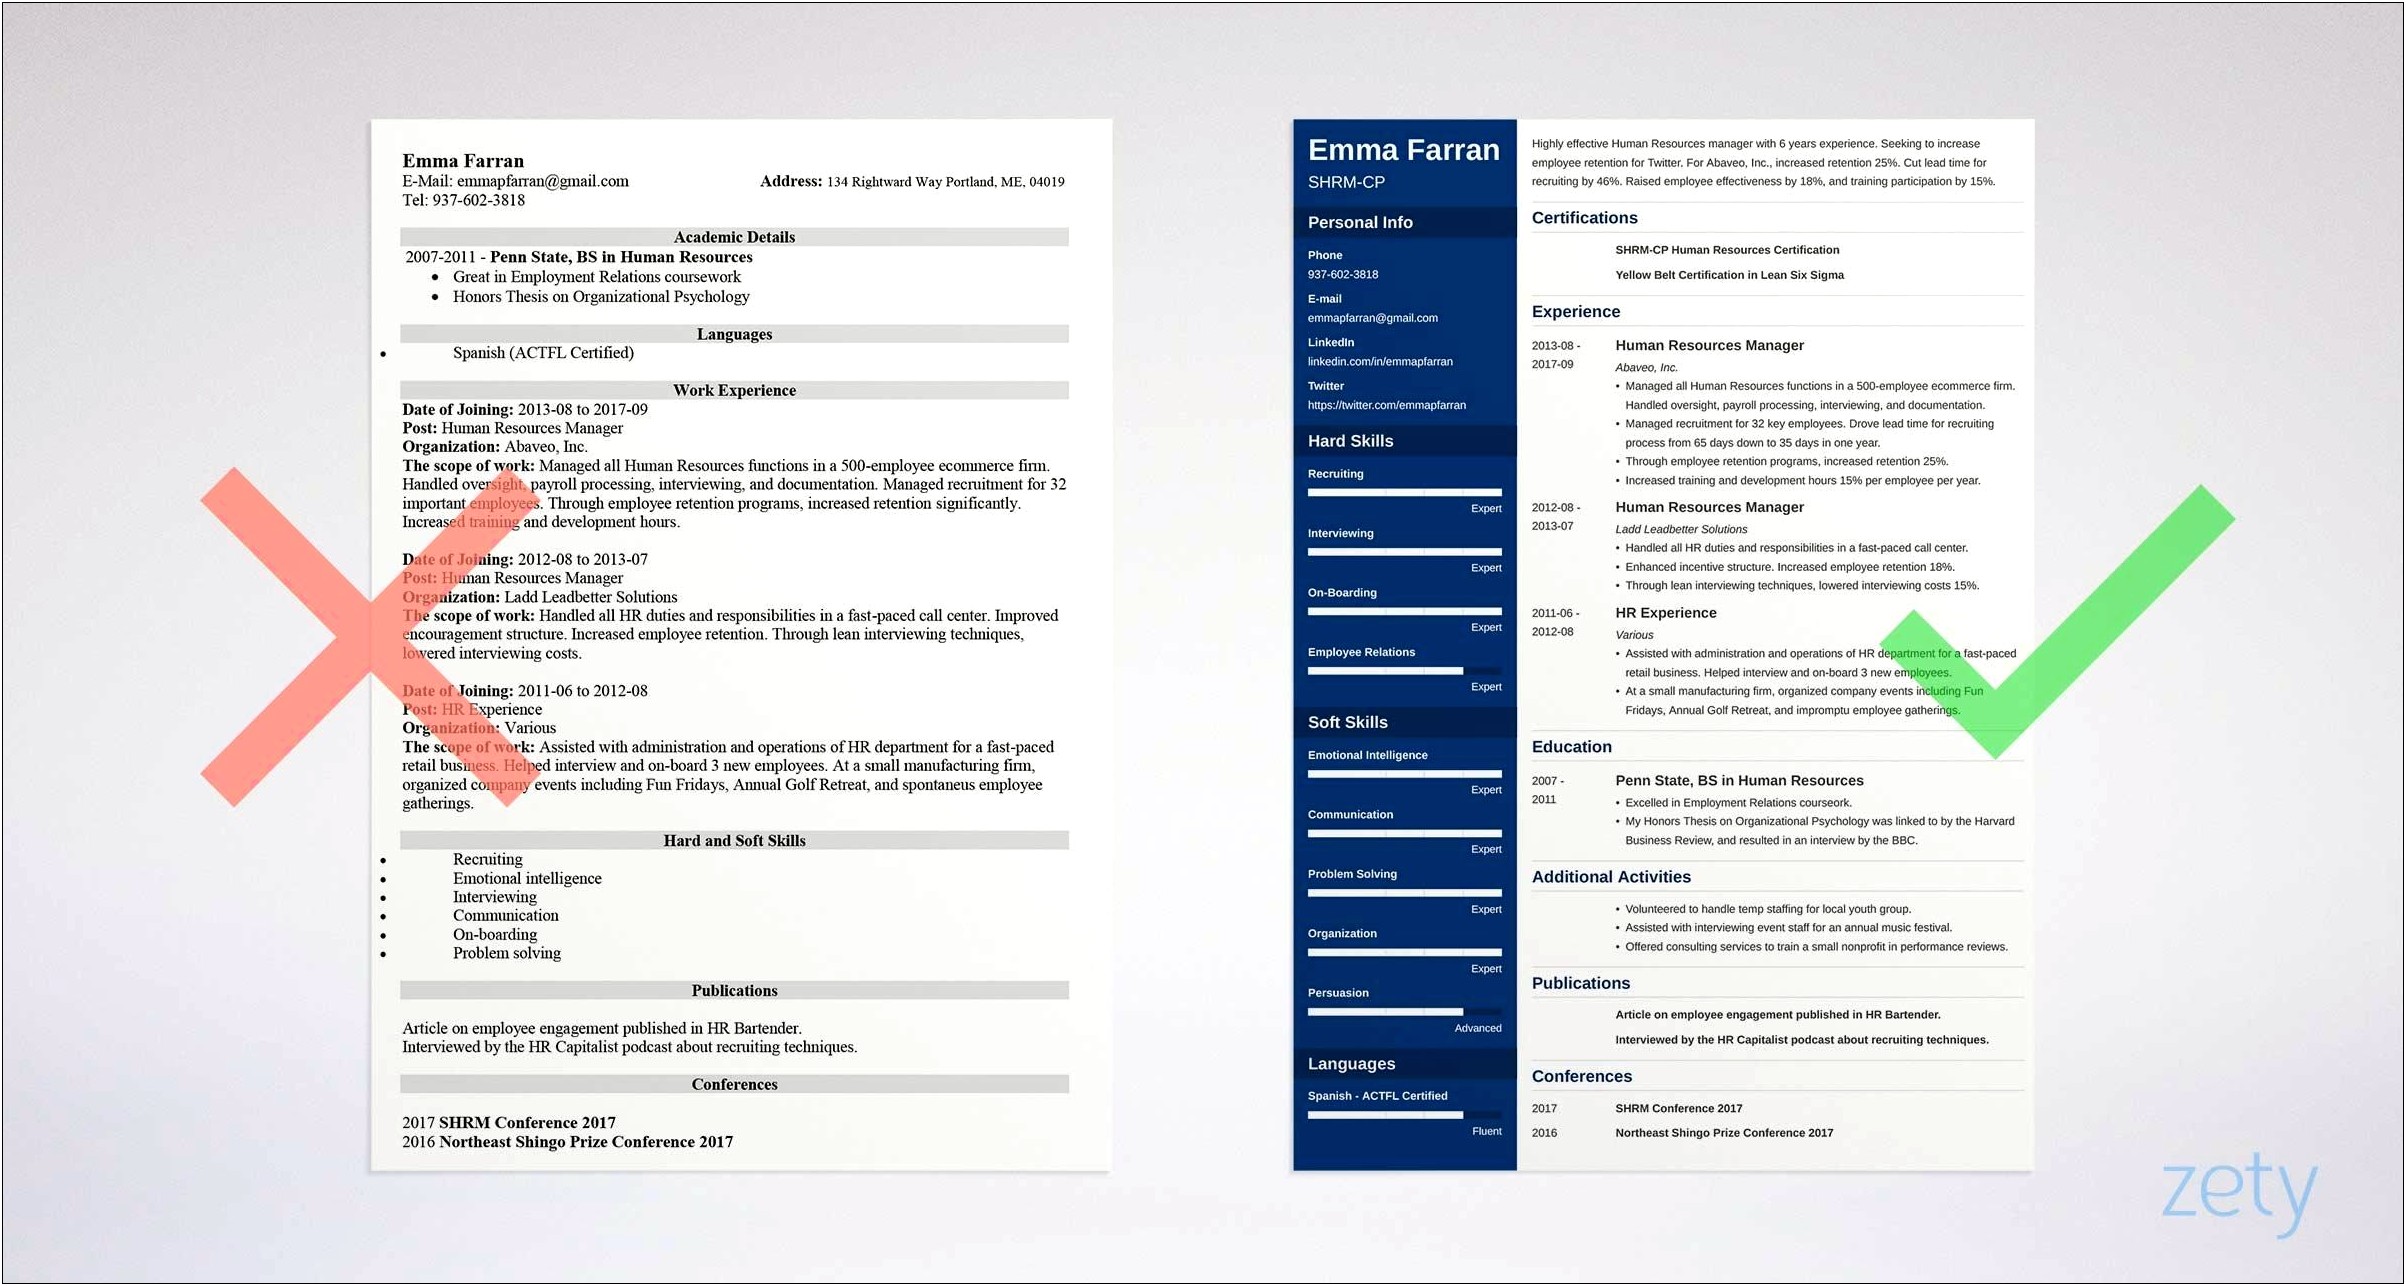 Example Of Resume Penn State